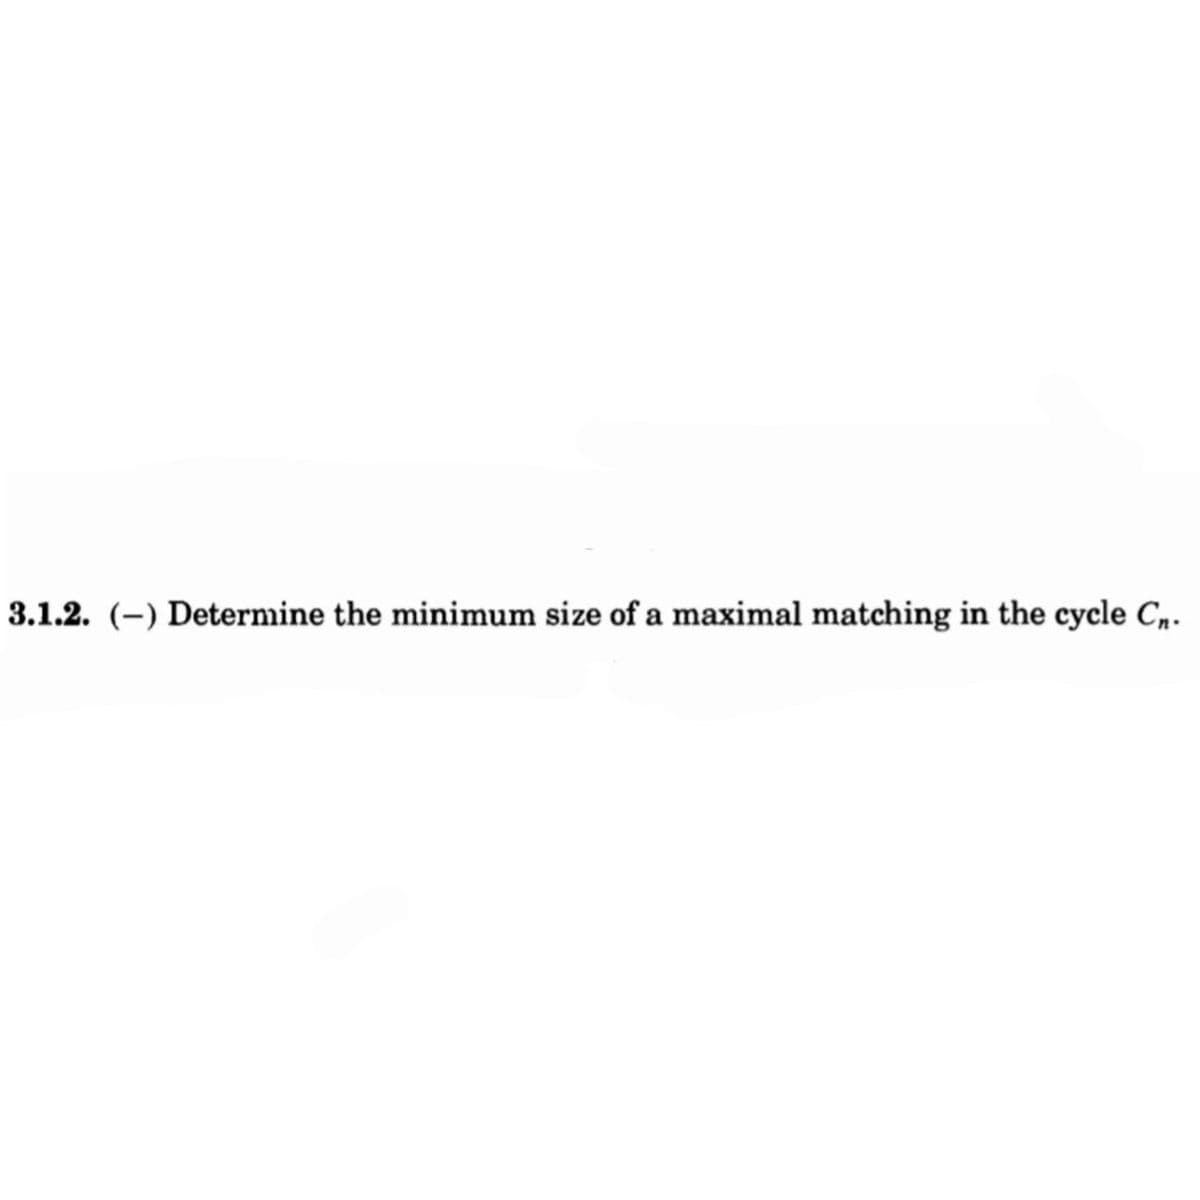 3.1.2. (-) Determine the minimum size of a maximal matching in the cycle C,.
